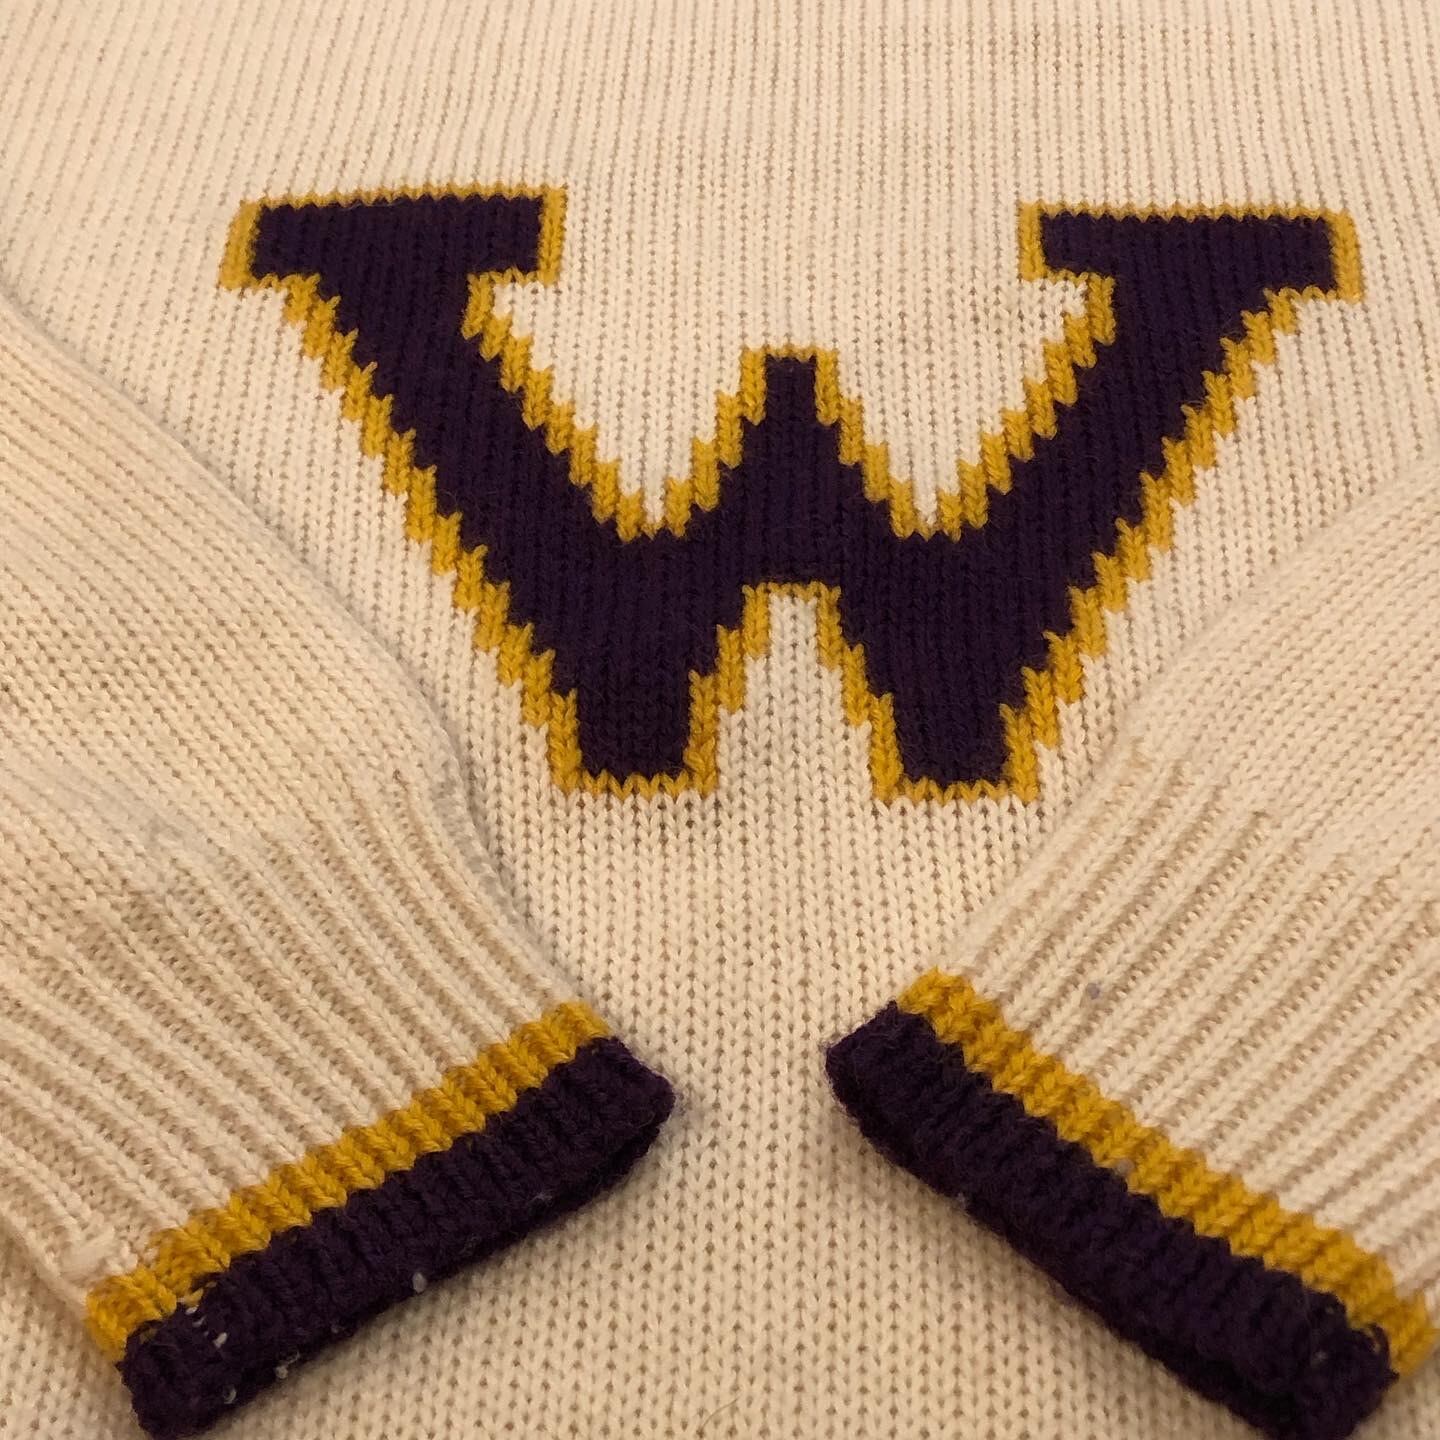 90s Callegiate Traditions "W" wool knit